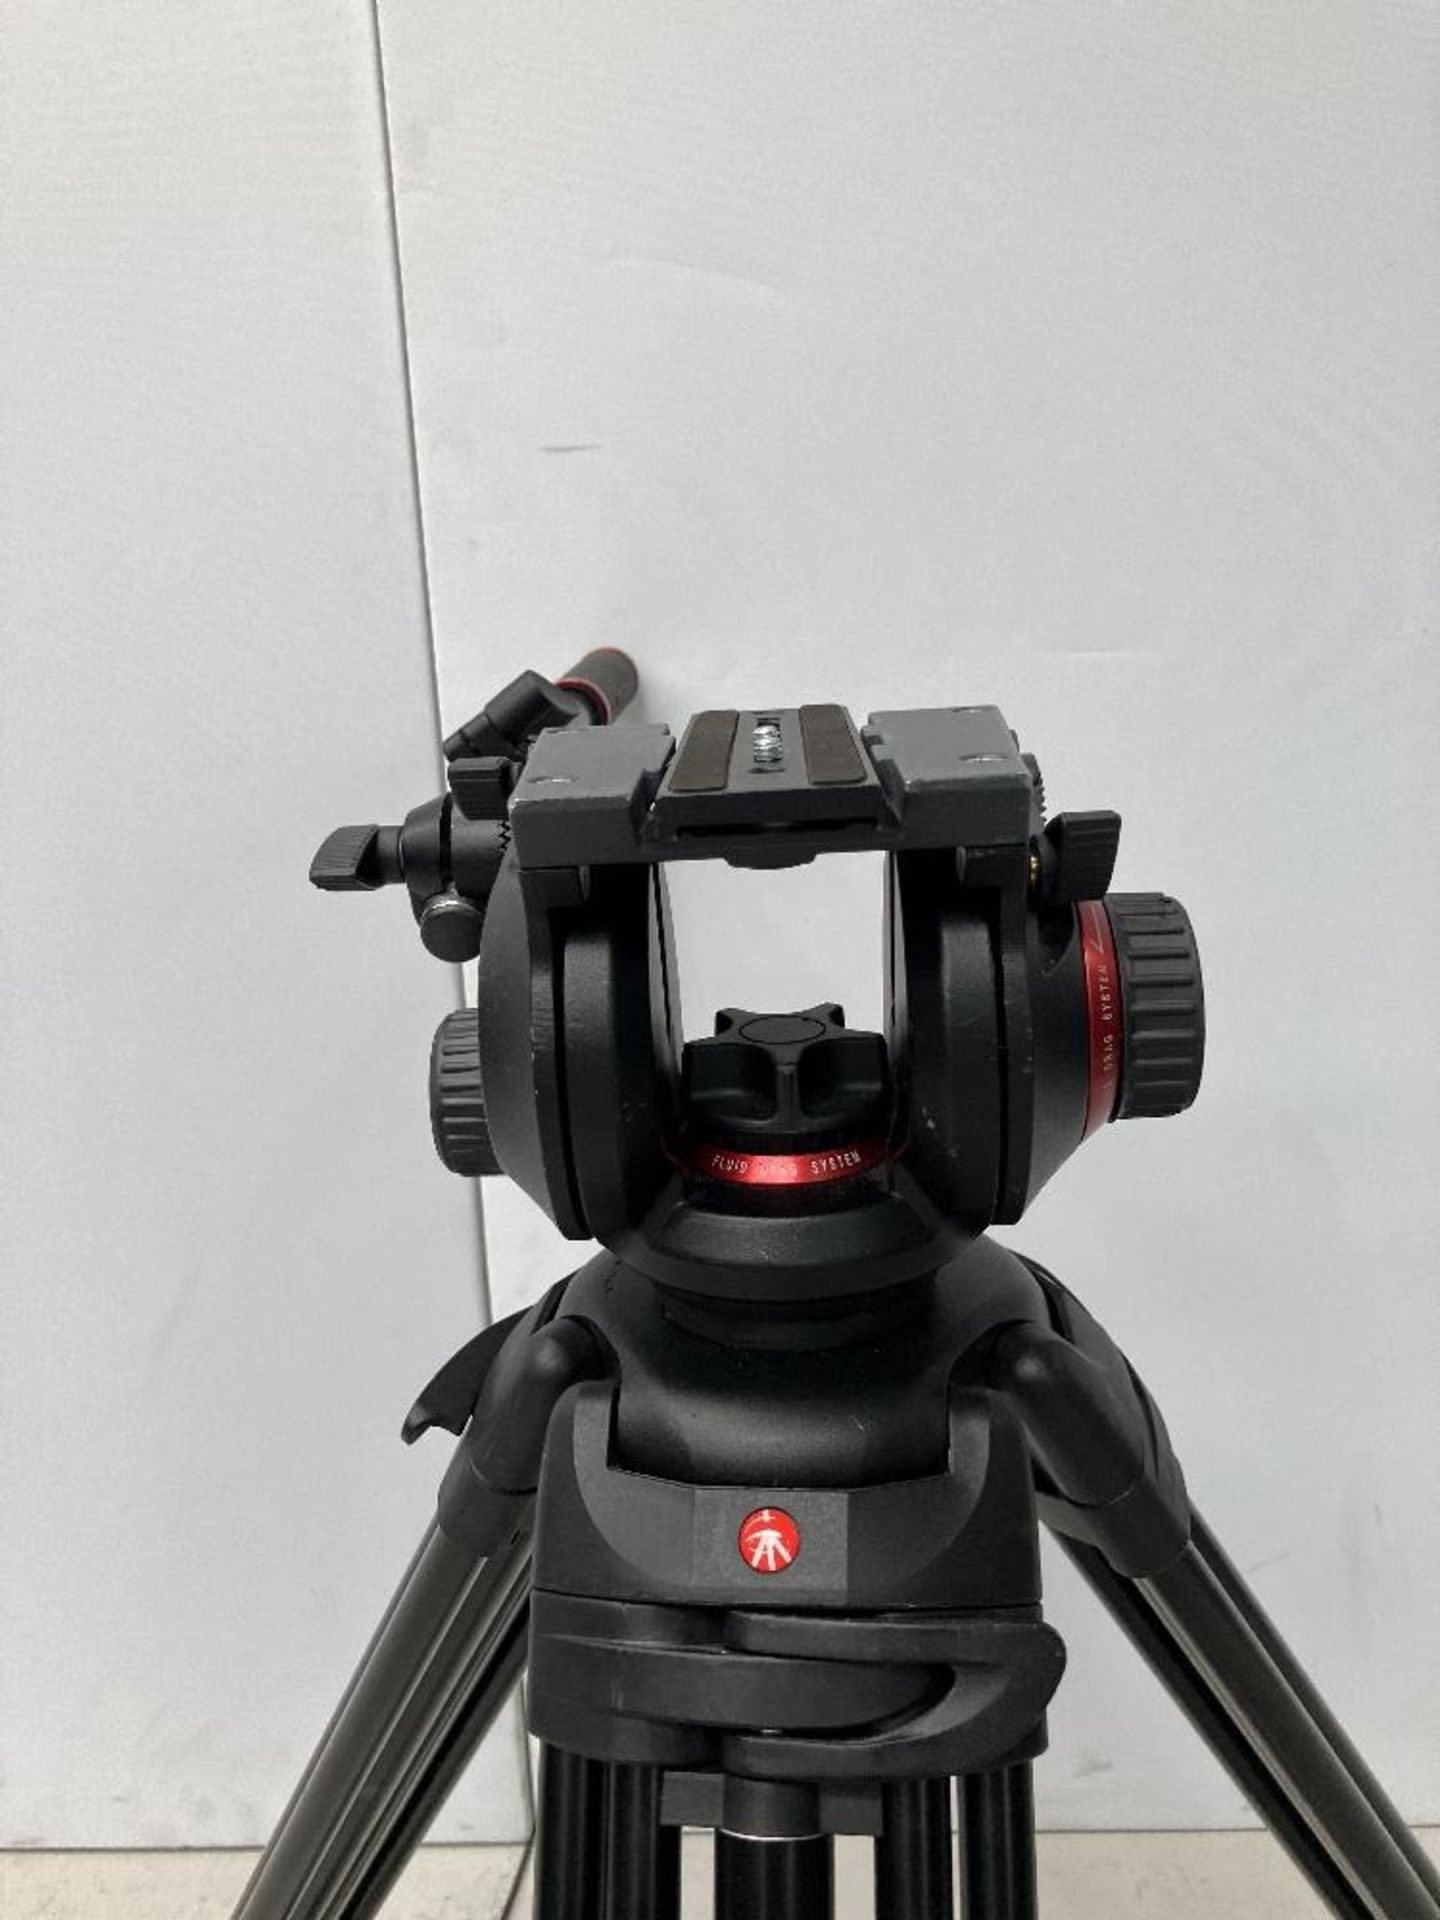 Manfrotto 504HD Tripod Head and 546B Tripod with Carbon Fibre Legs with Protective Tube - Image 4 of 6